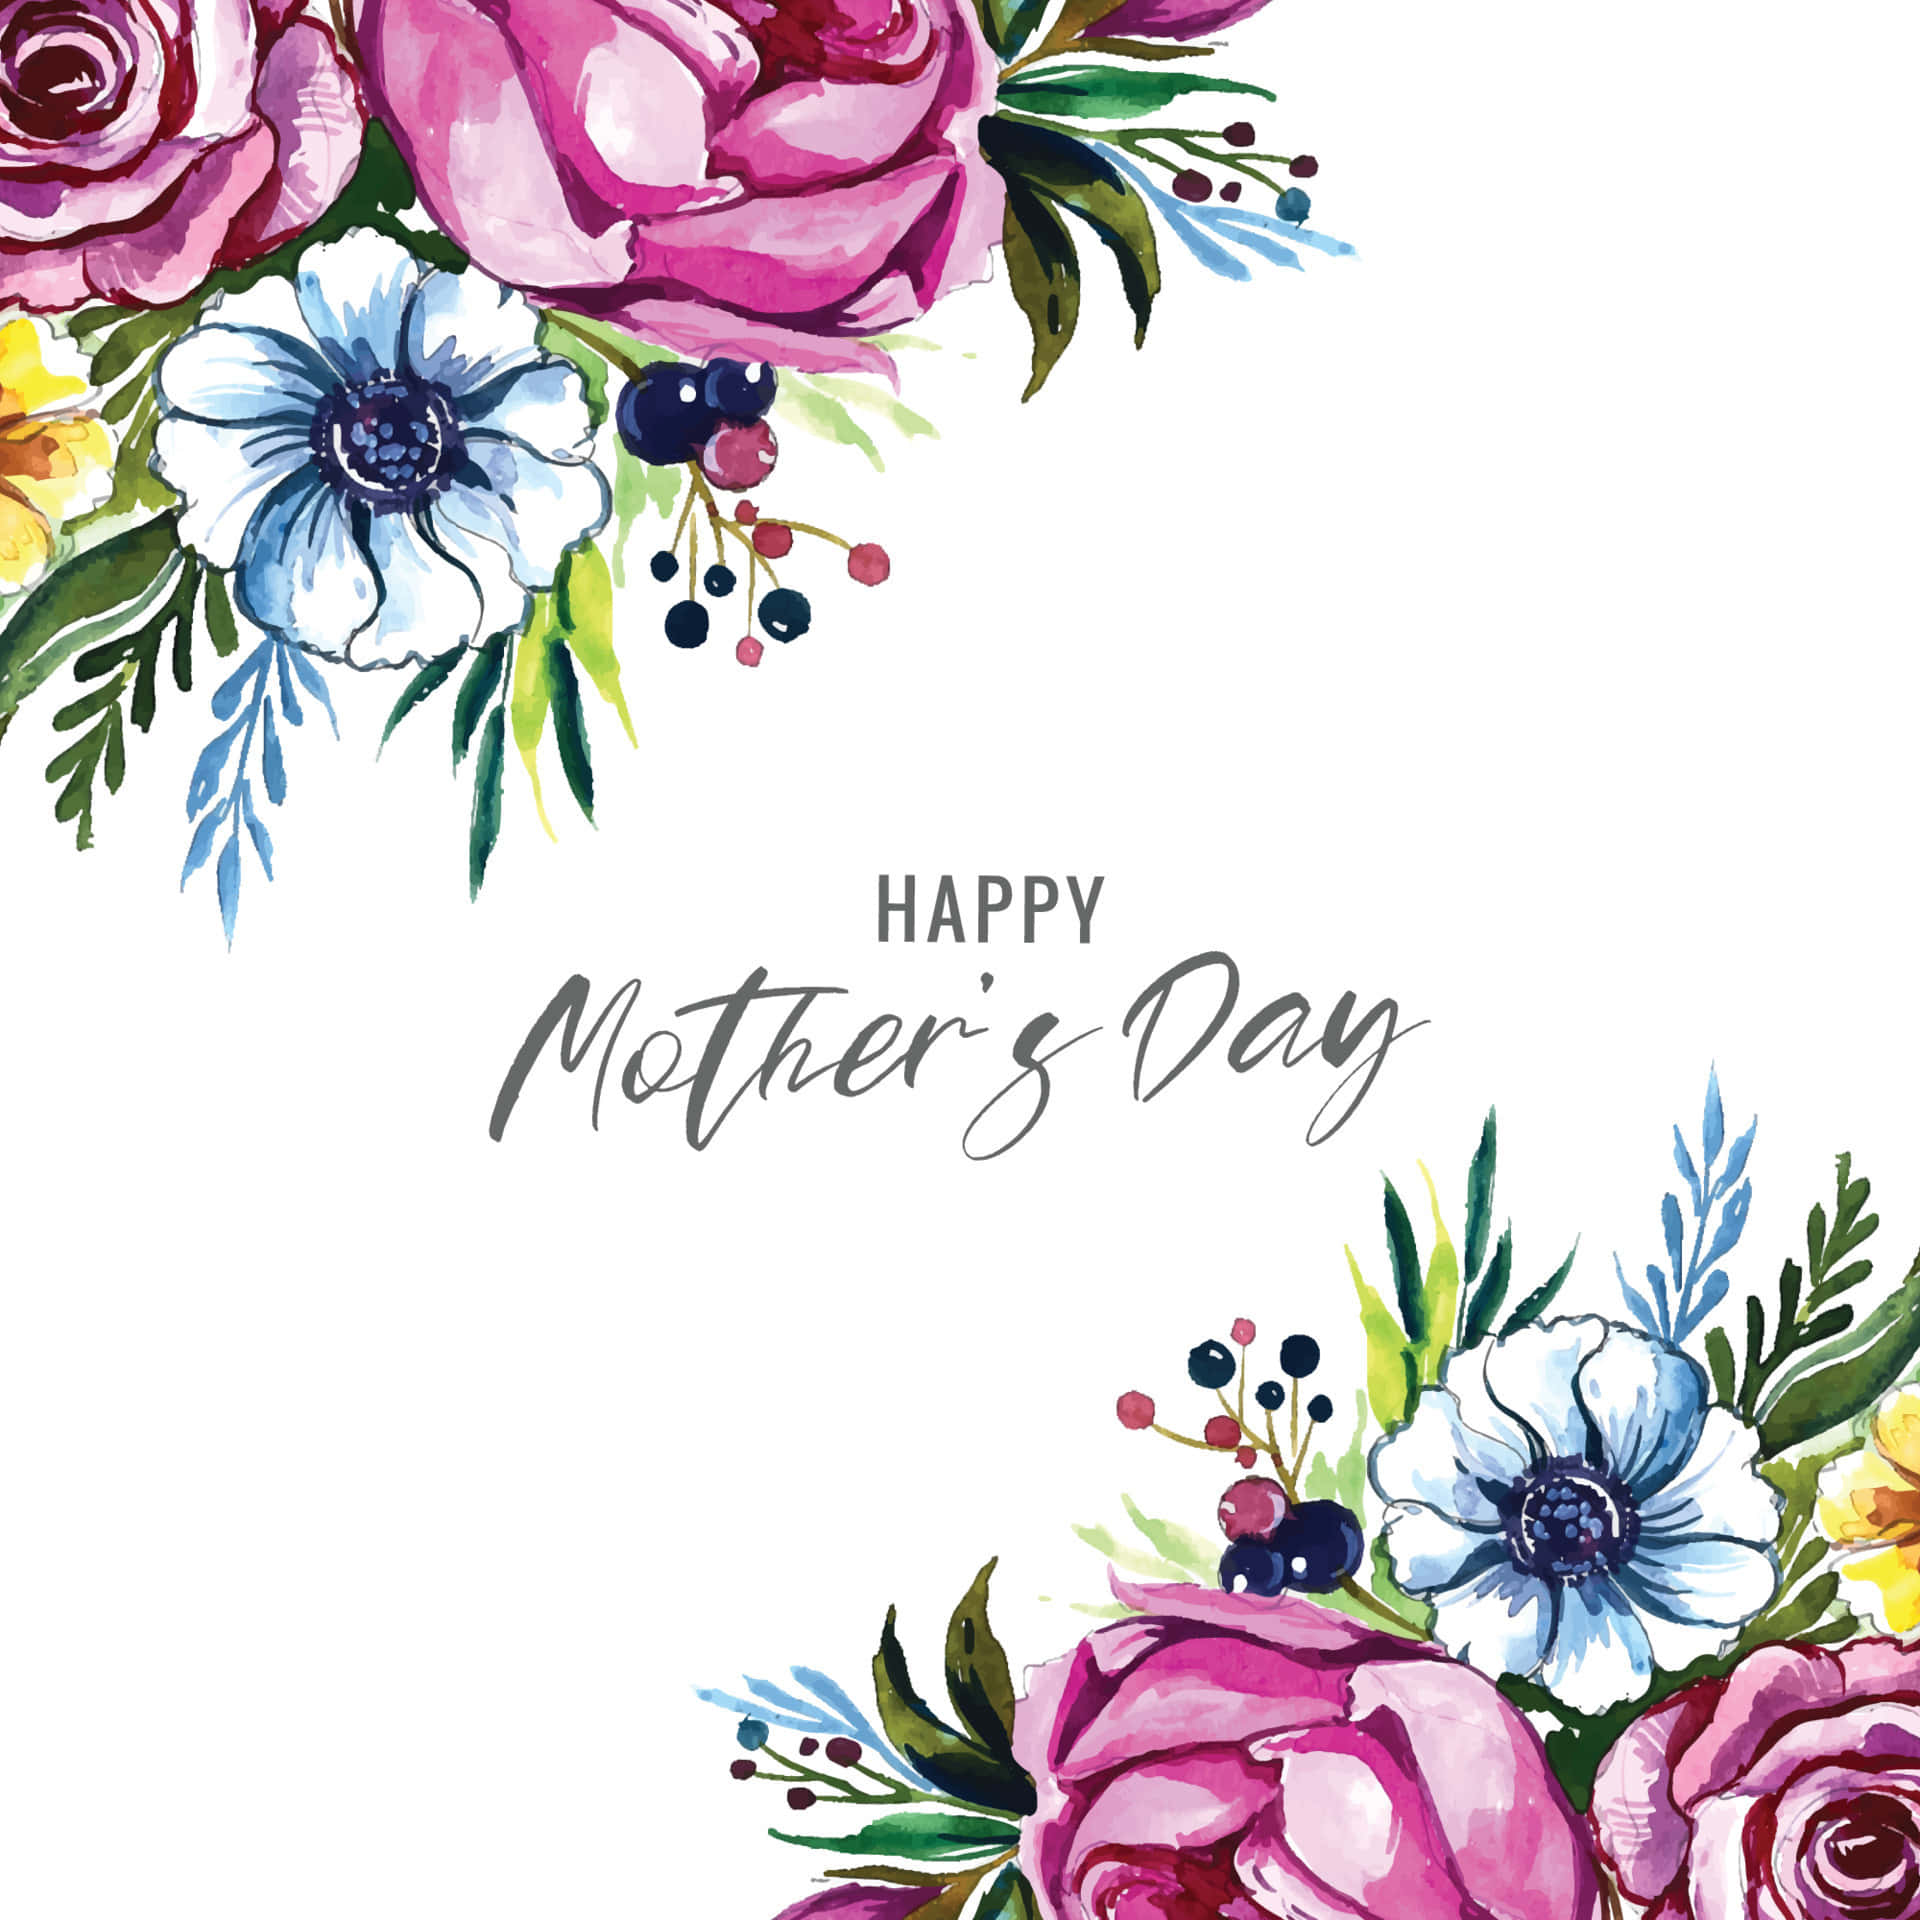 Happy Mother's Day Card With Watercolor Flowers